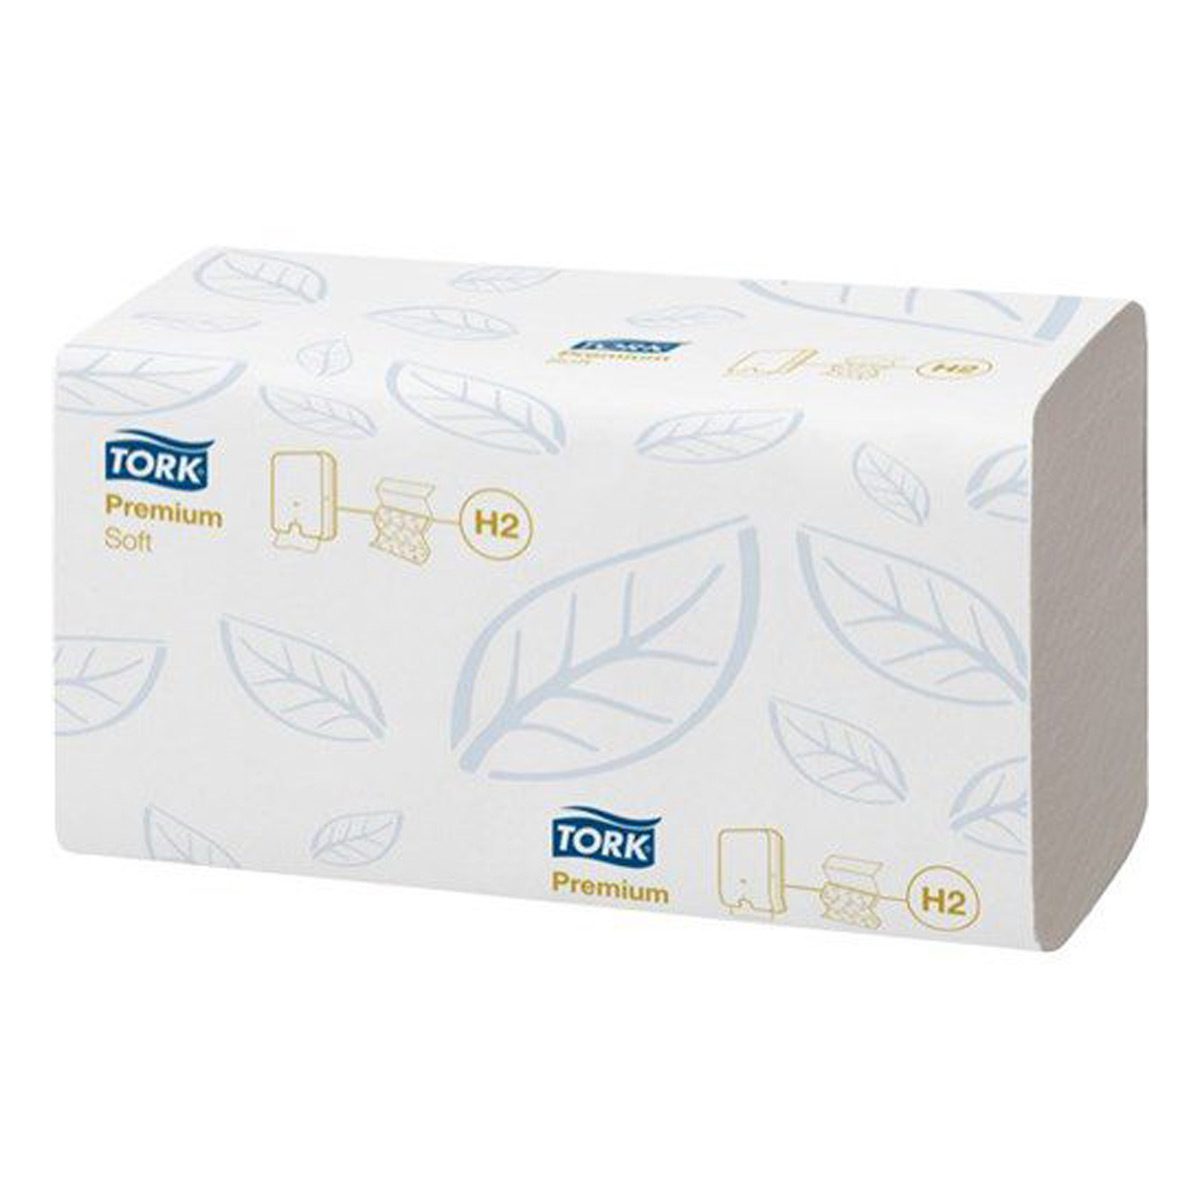 paper-products-paper-towels-tork-xpress-xtra-soft-towel-2-ply-h2-150-sheets-21-packs-superior-hand-drying-and-comfort-medium-traffic-washrooms-good-hygiene-vjs-distributors-100289